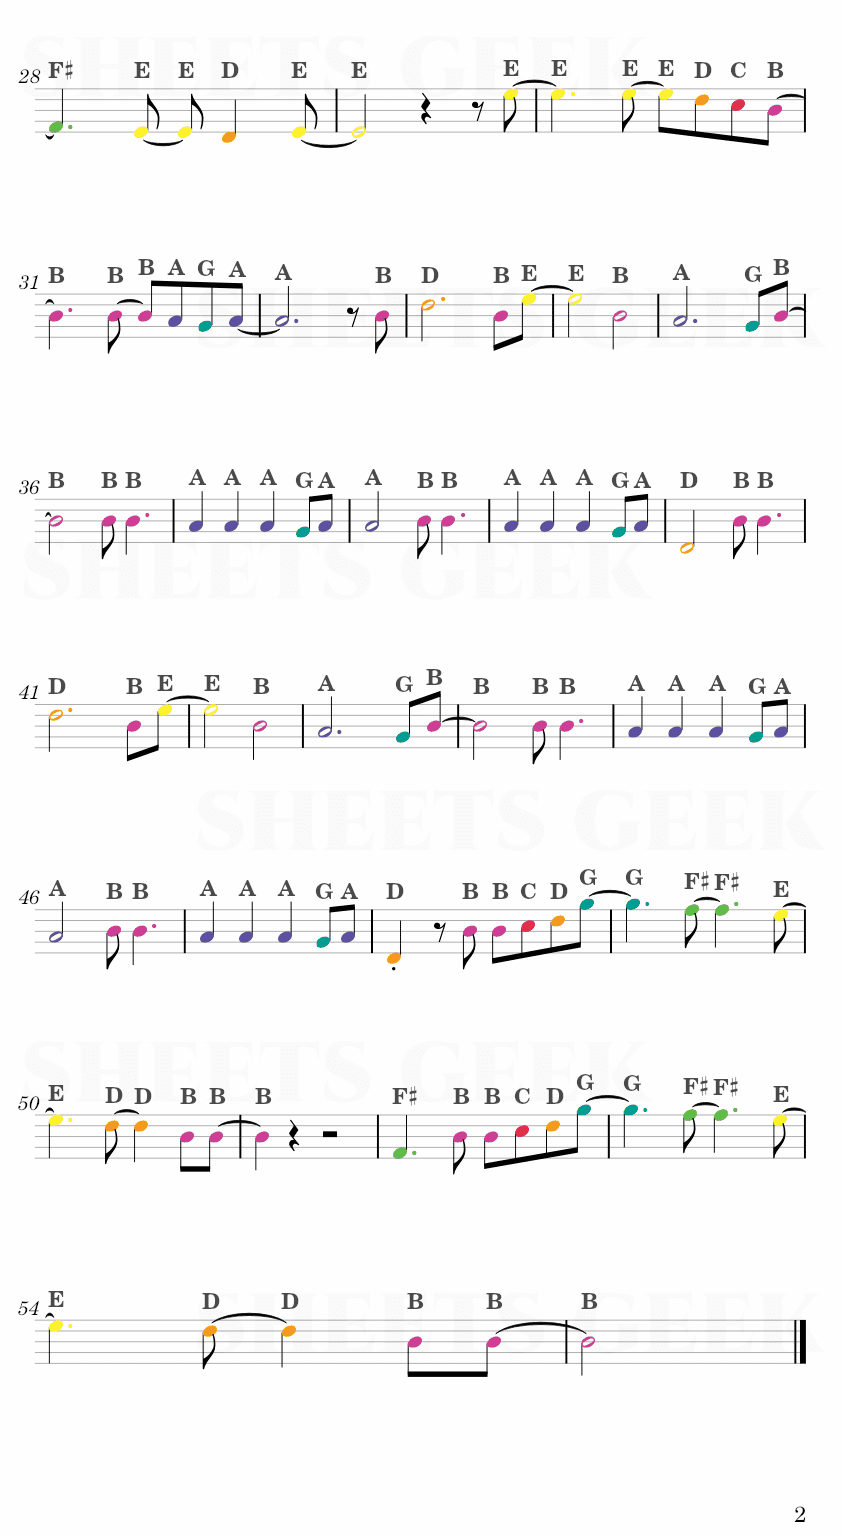 All Of Me - John Legend Easy Sheet Music Free for piano, keyboard, flute, violin, sax, cello page 2